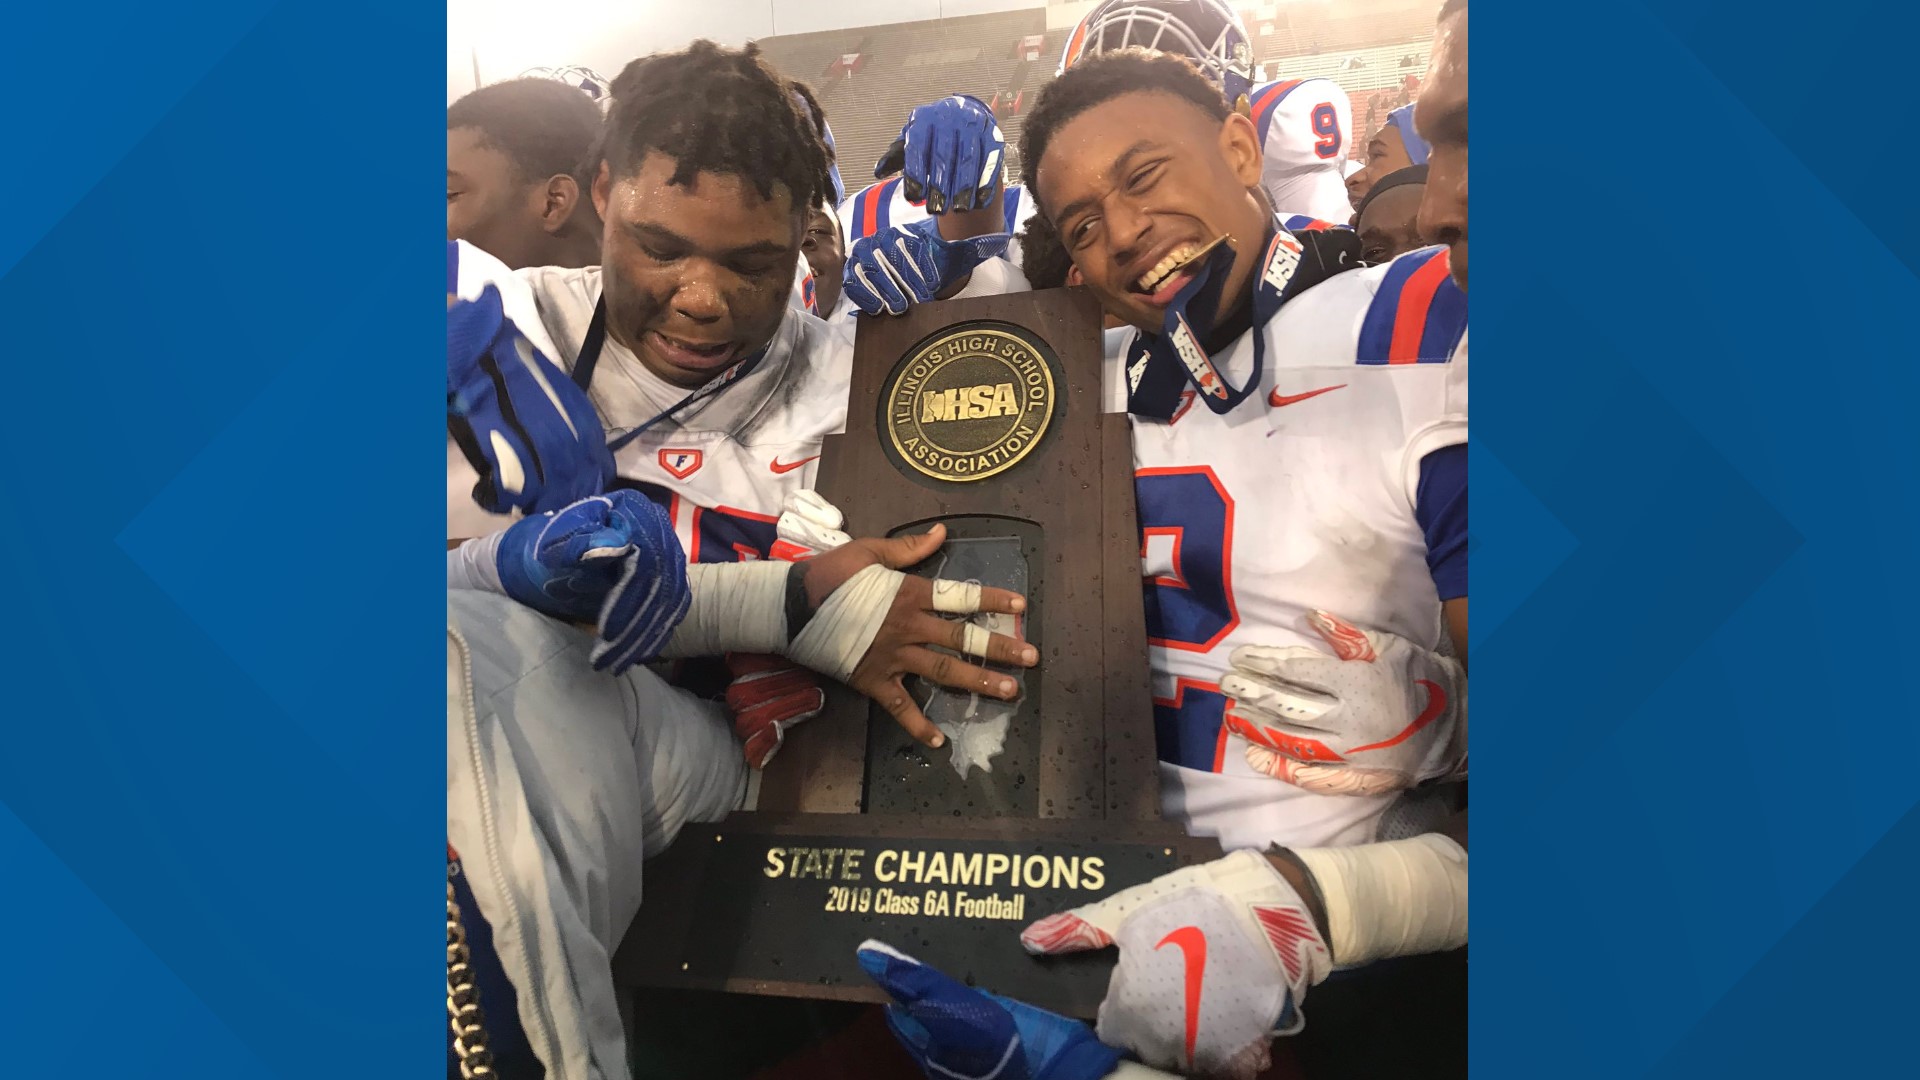 East St. Louis takes home state championship title